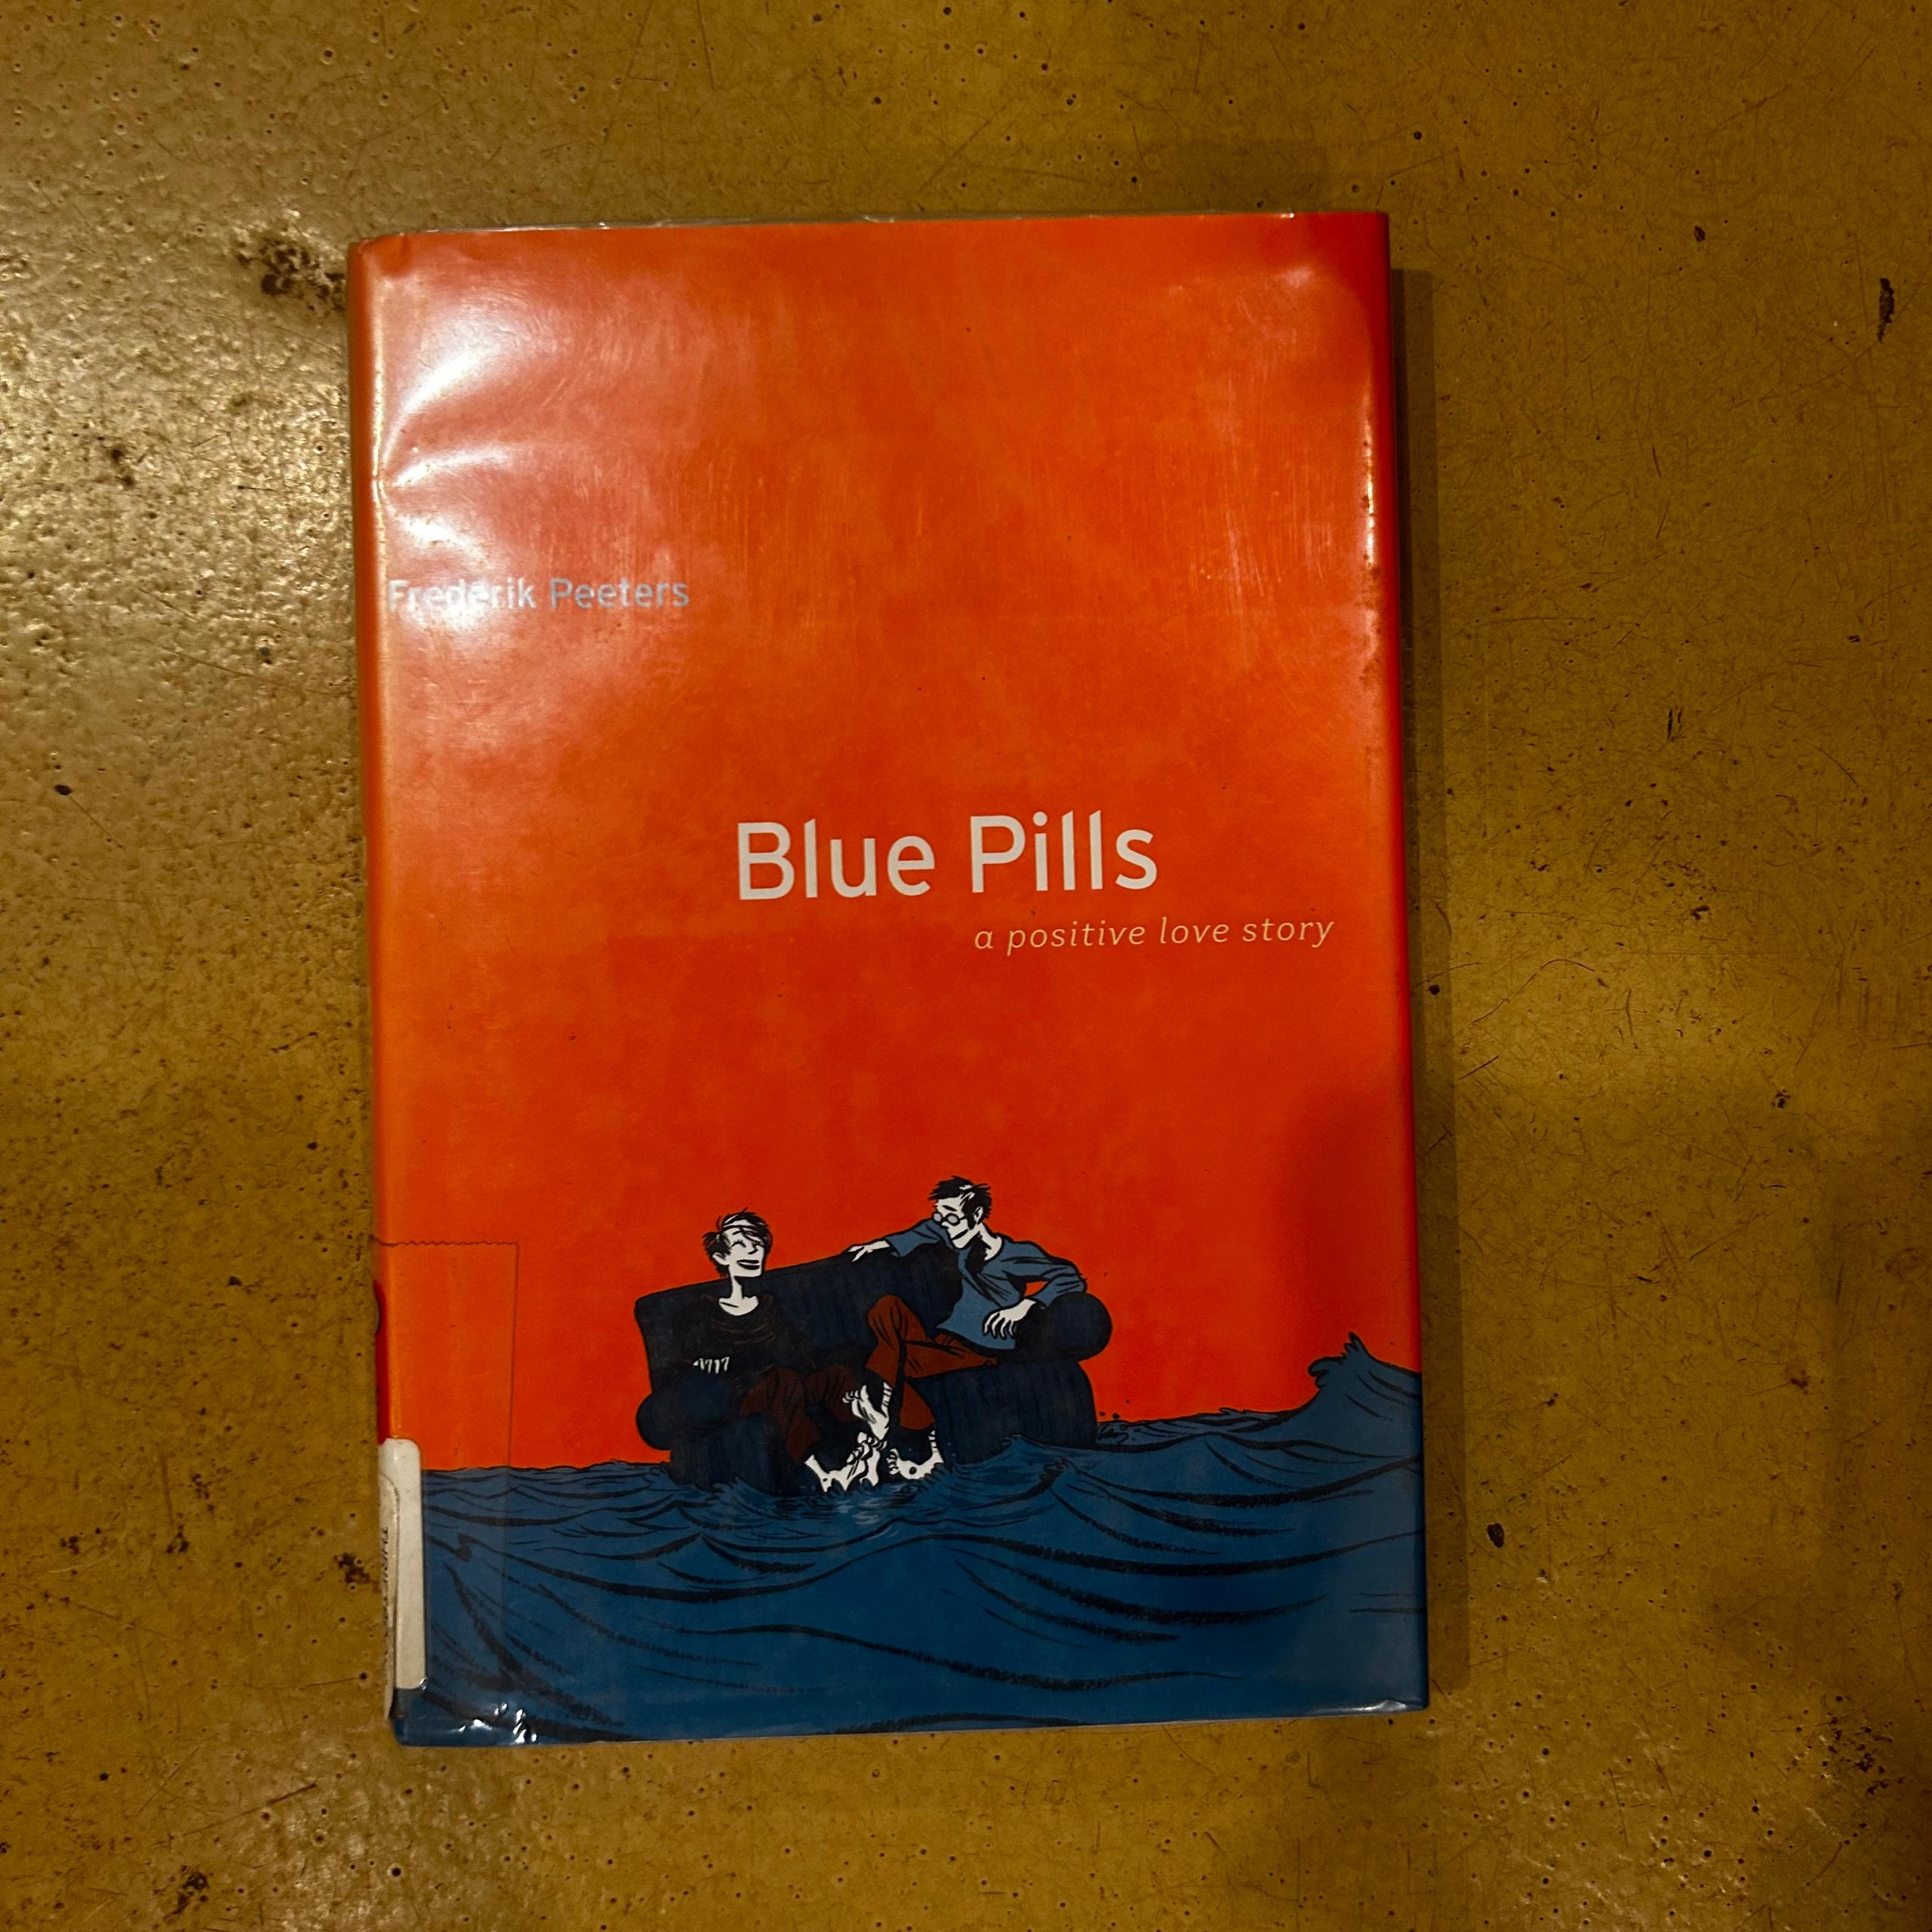 Blue Pills: A Positive Love Story by Frederik Peeters